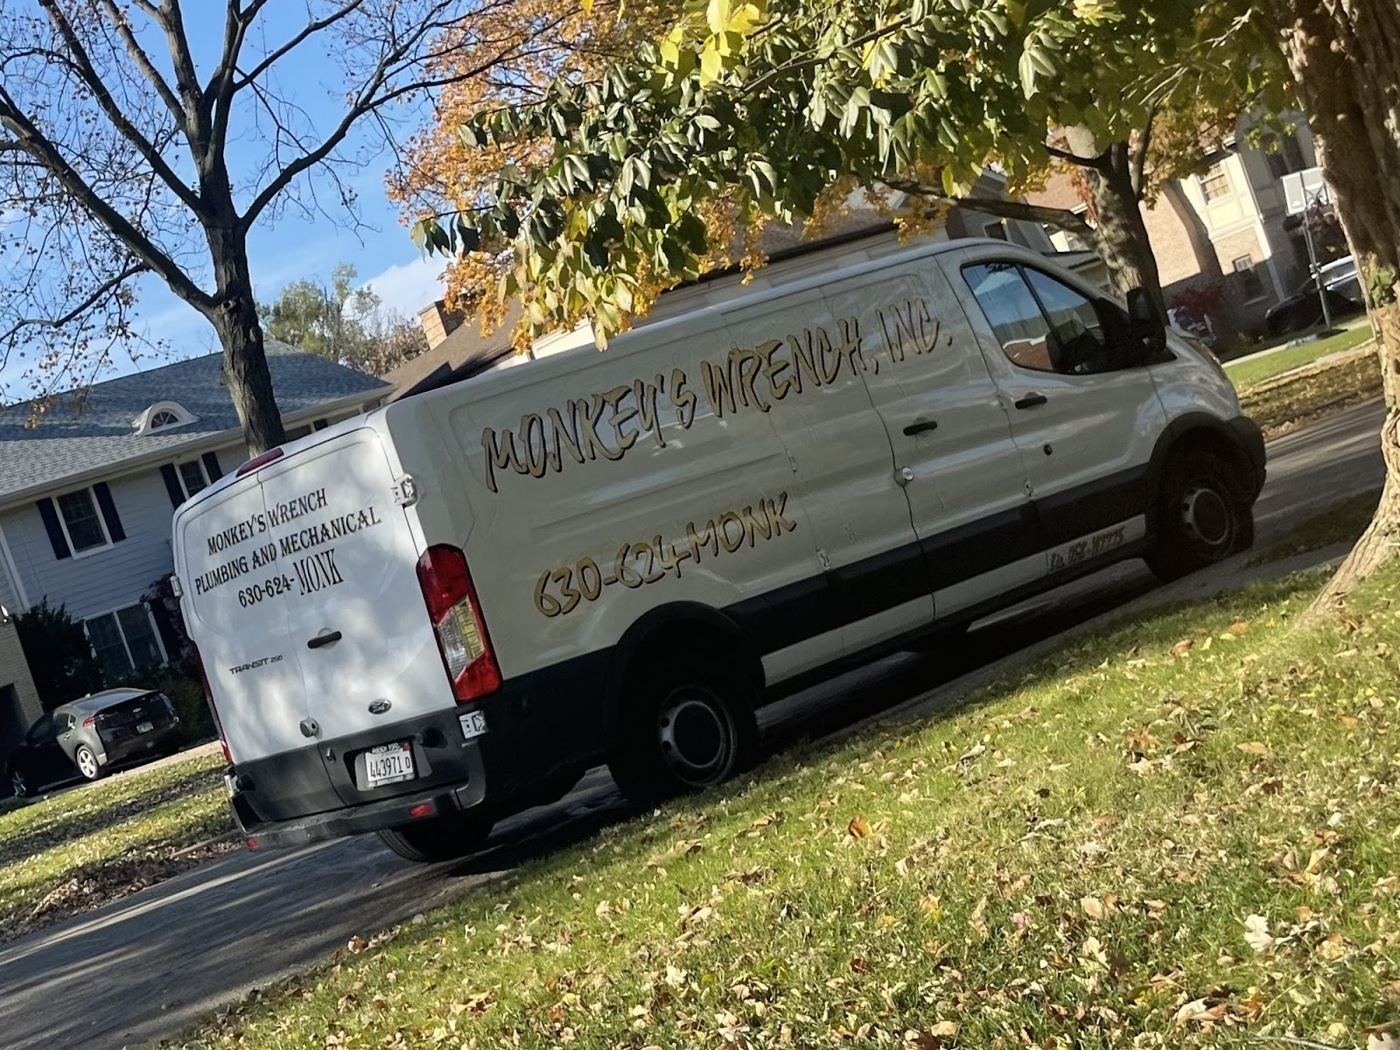 Since its inception over six years ago, the family-owned, fully licensed, and insured company has become the go-to name for all kinds of plumbing repair, maintenance, and installation services for the people of Chicago.